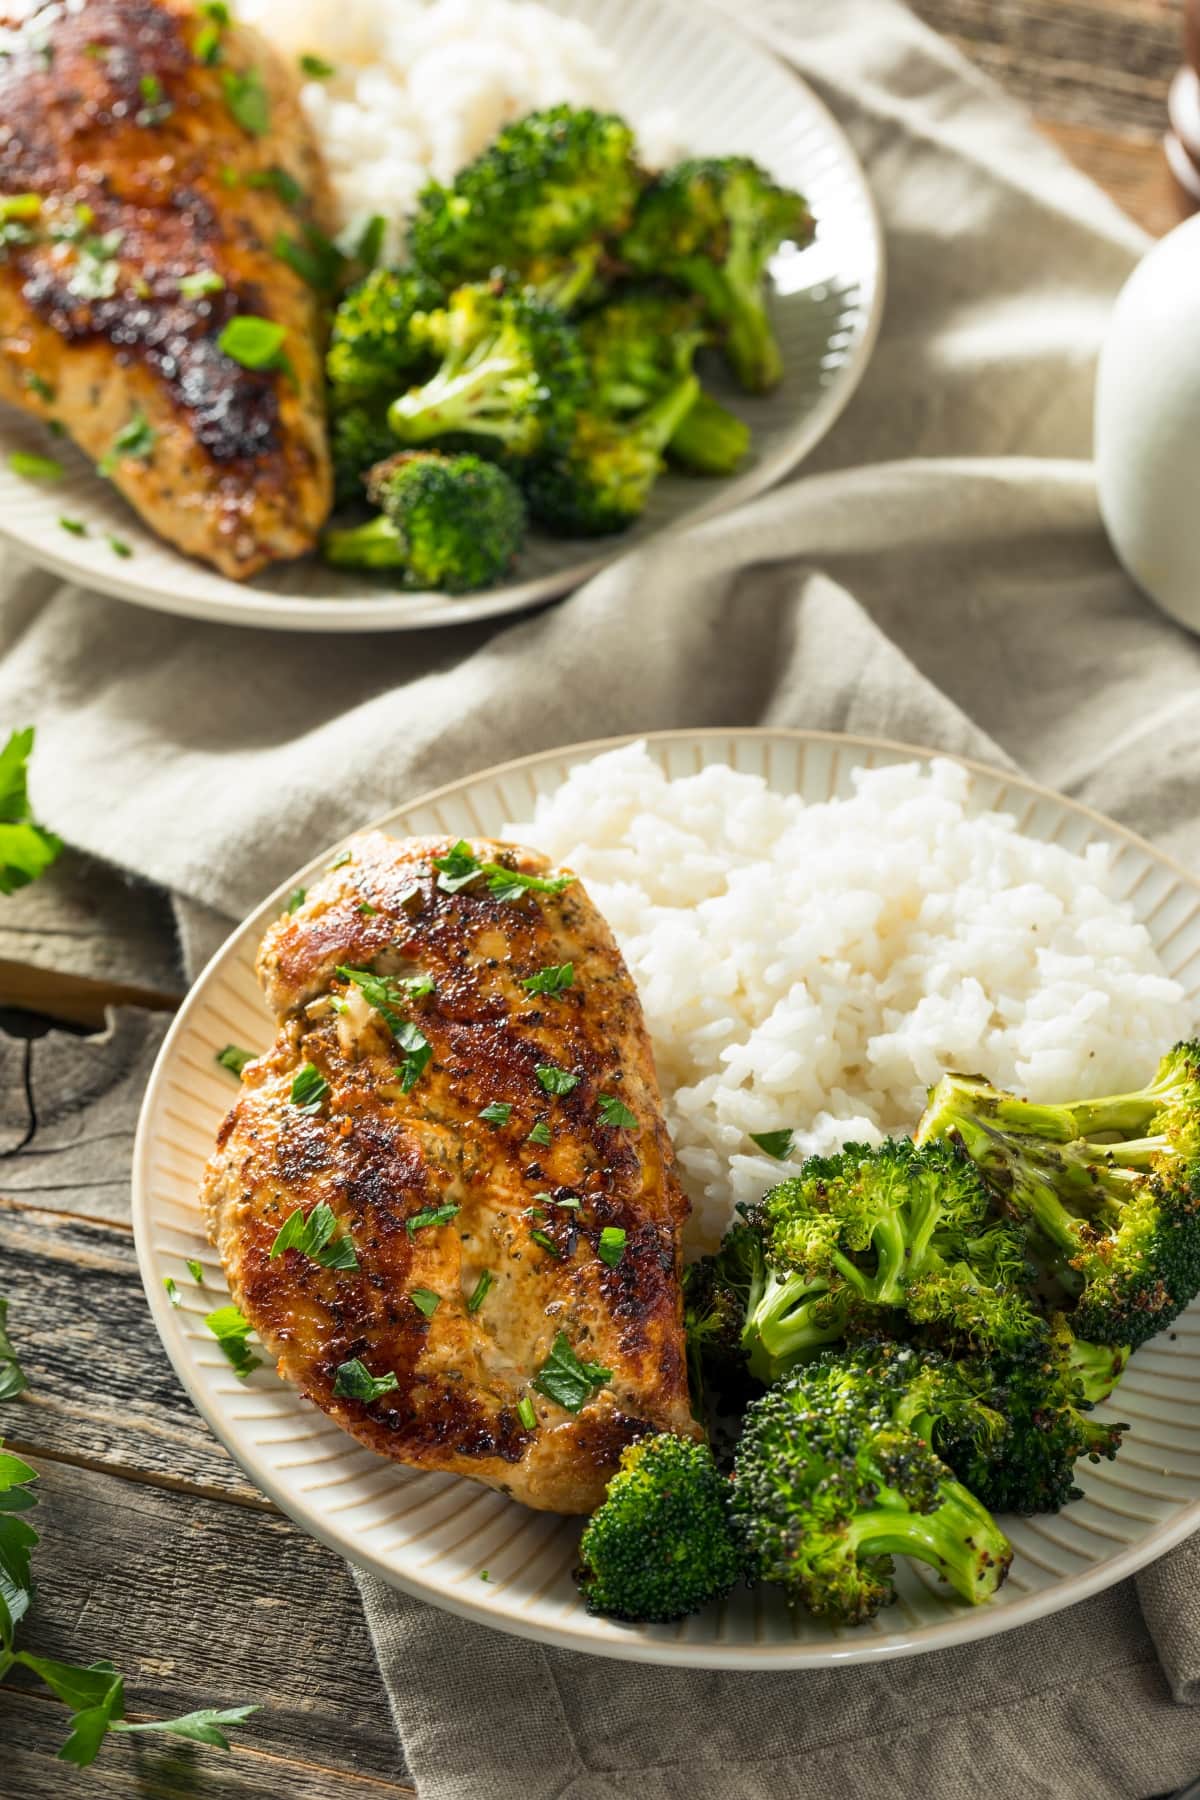 Two plates of food with rice, broccoli and baked chicken breast